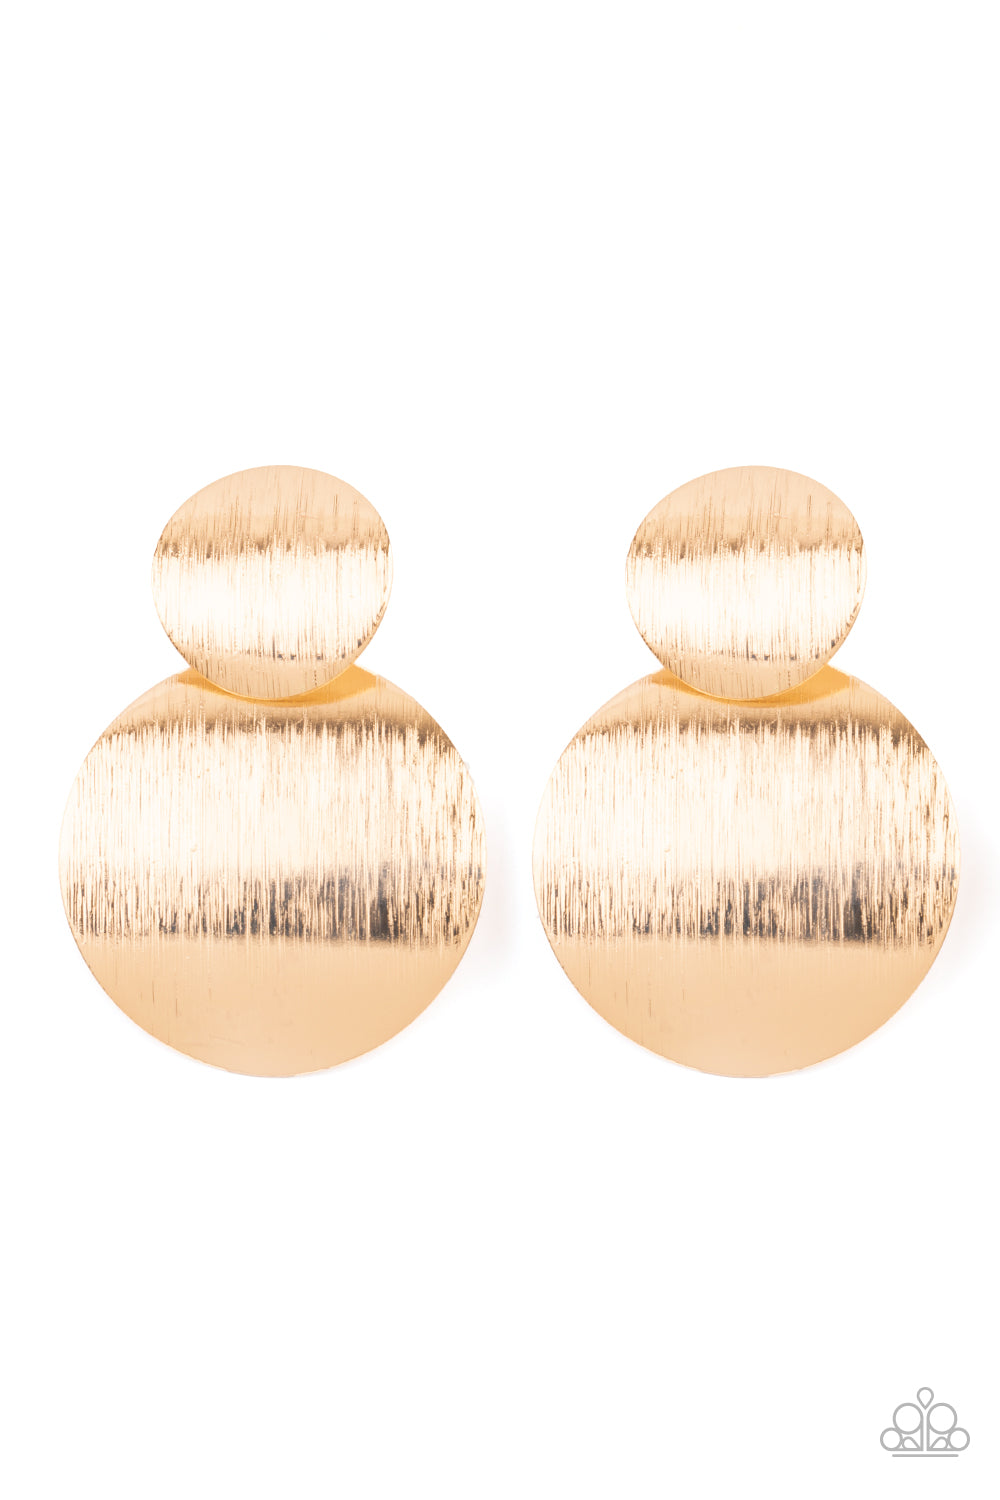 Earring-Delicately scratched in shimmer, curved gold discs link into a stacked lure for a blinding metallic look. Earring attaches to a standard post fitting.  Sold as one pair of post earrings.